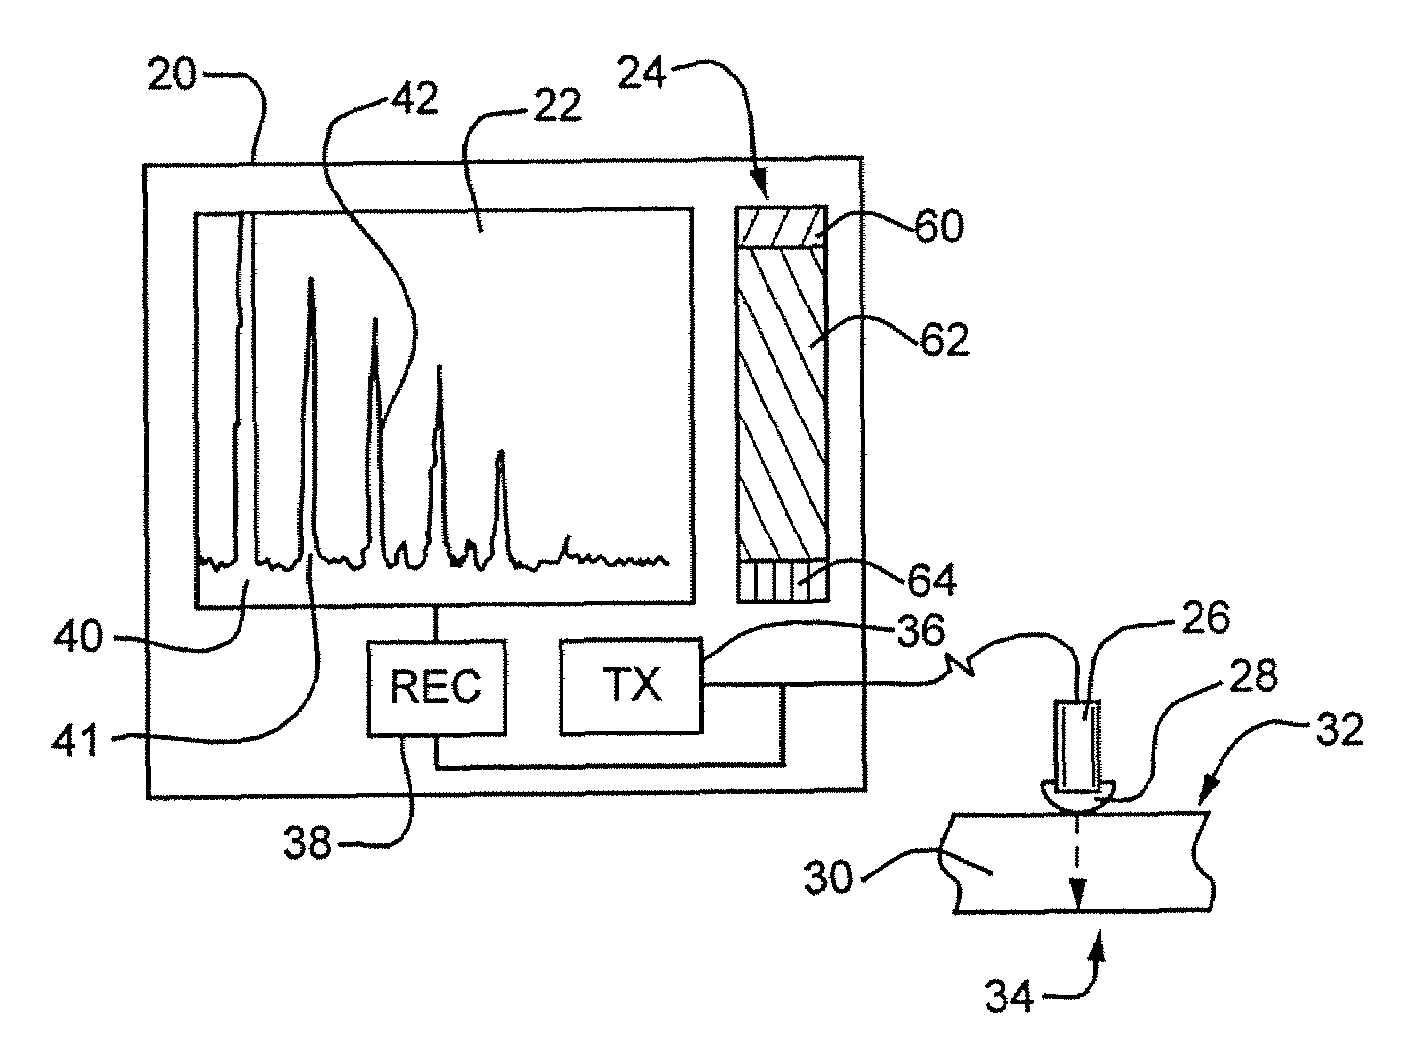 Ultrasonic inspection apparatus for inspecting a workpiece